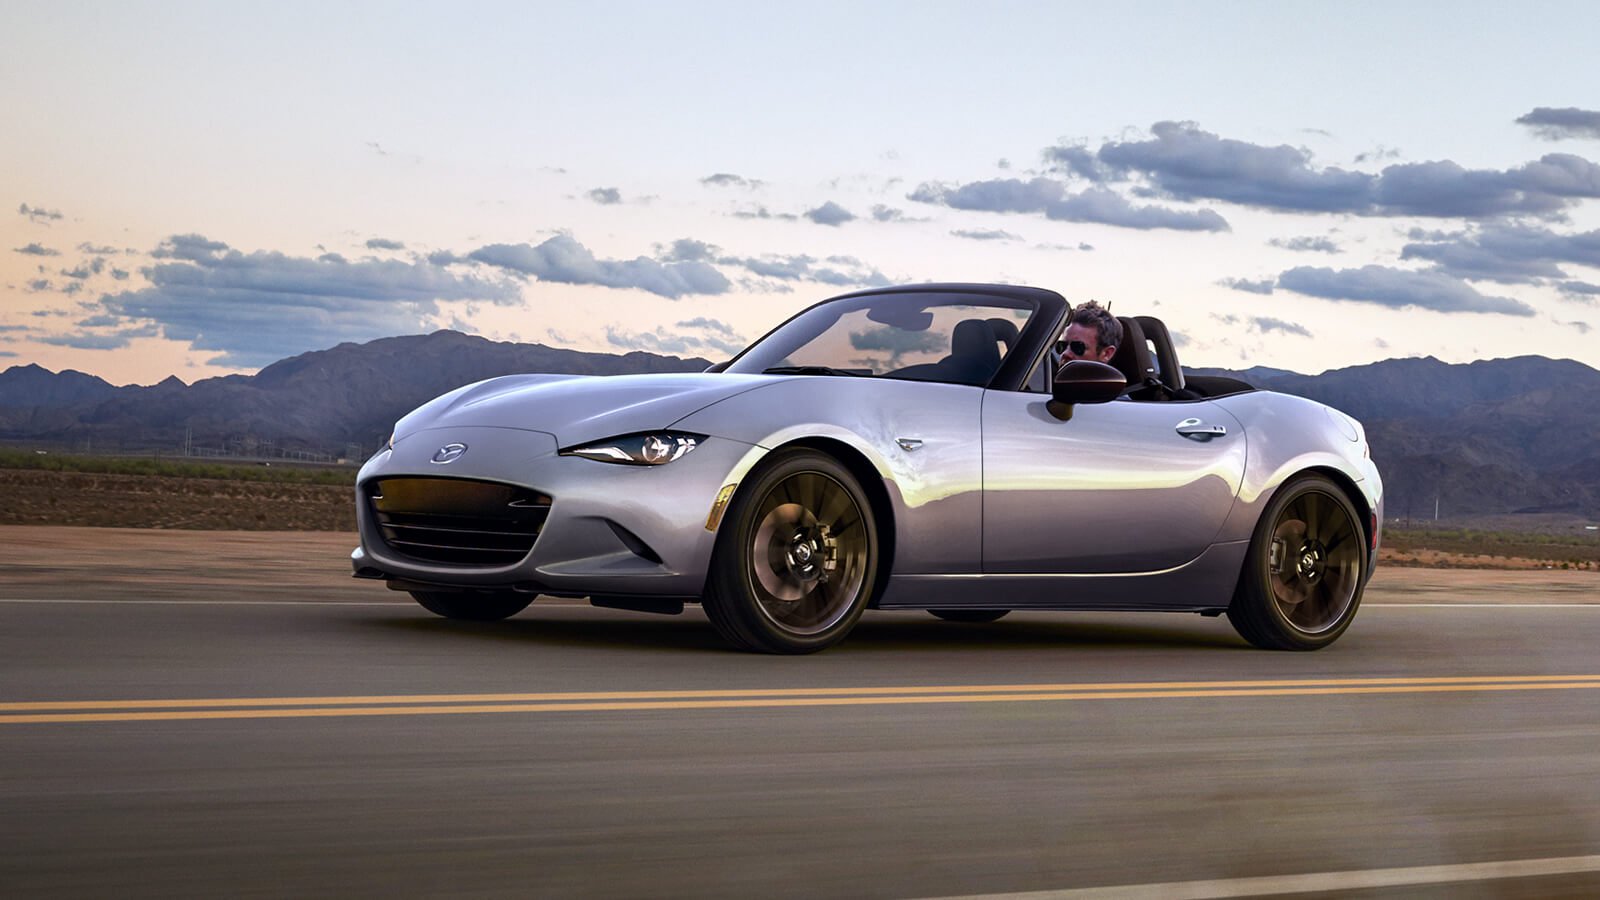 Machine Grey Metallic Mazda MX-5 Soft Top with roof open rounds drives down highway on a blue-sky evening beyond a mountain range. 